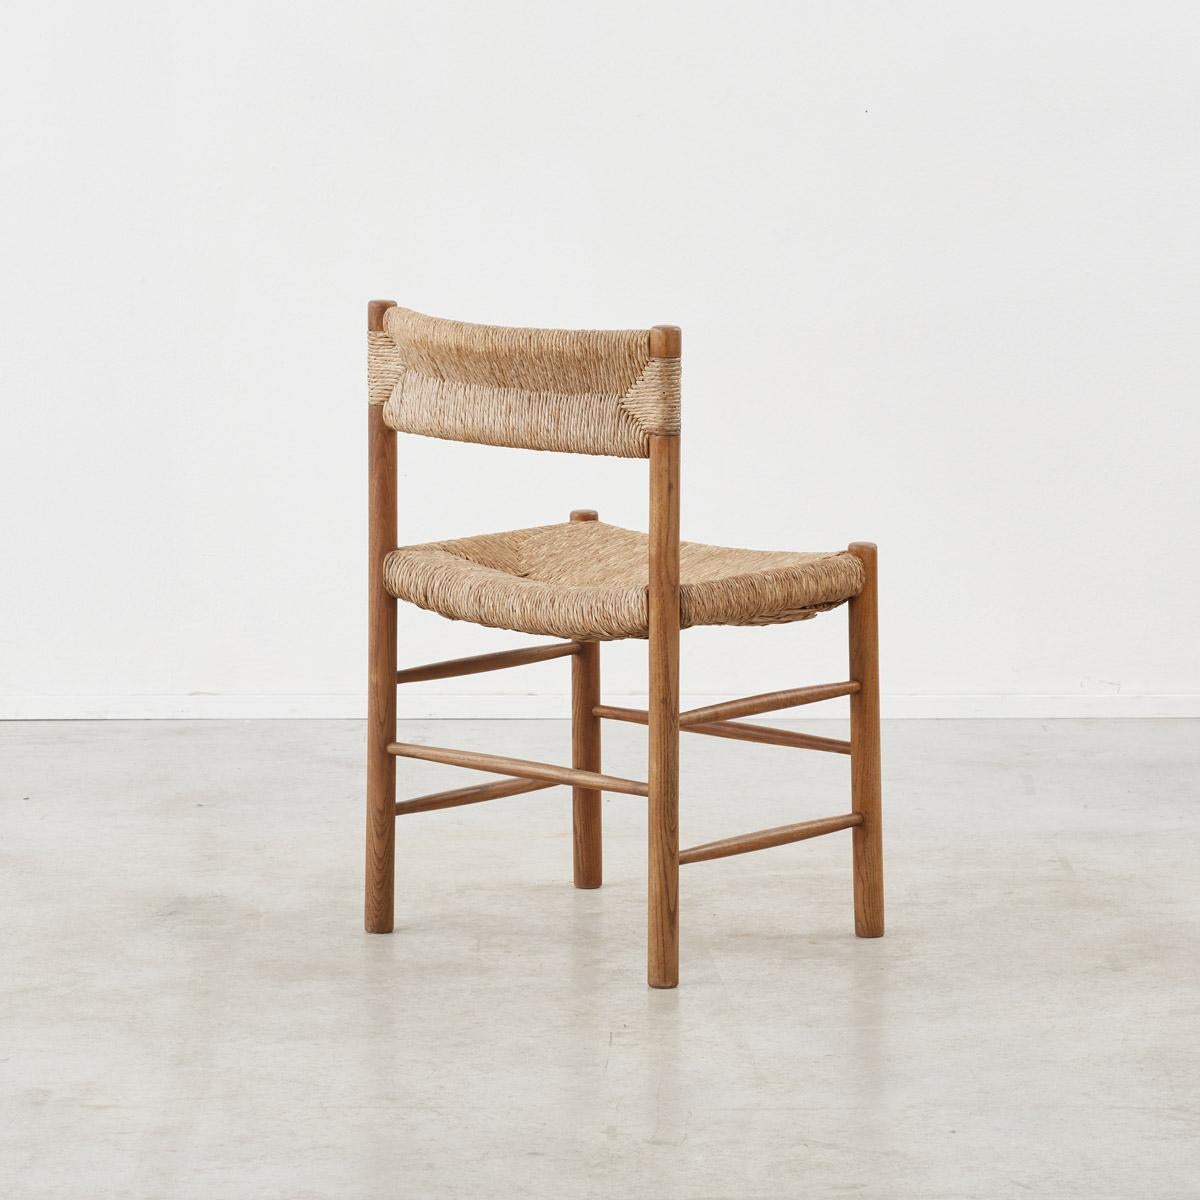 20th Century Set of Four Charlotte Perriand Dordogne Chairs for Robert Sentou, France c1950 For Sale